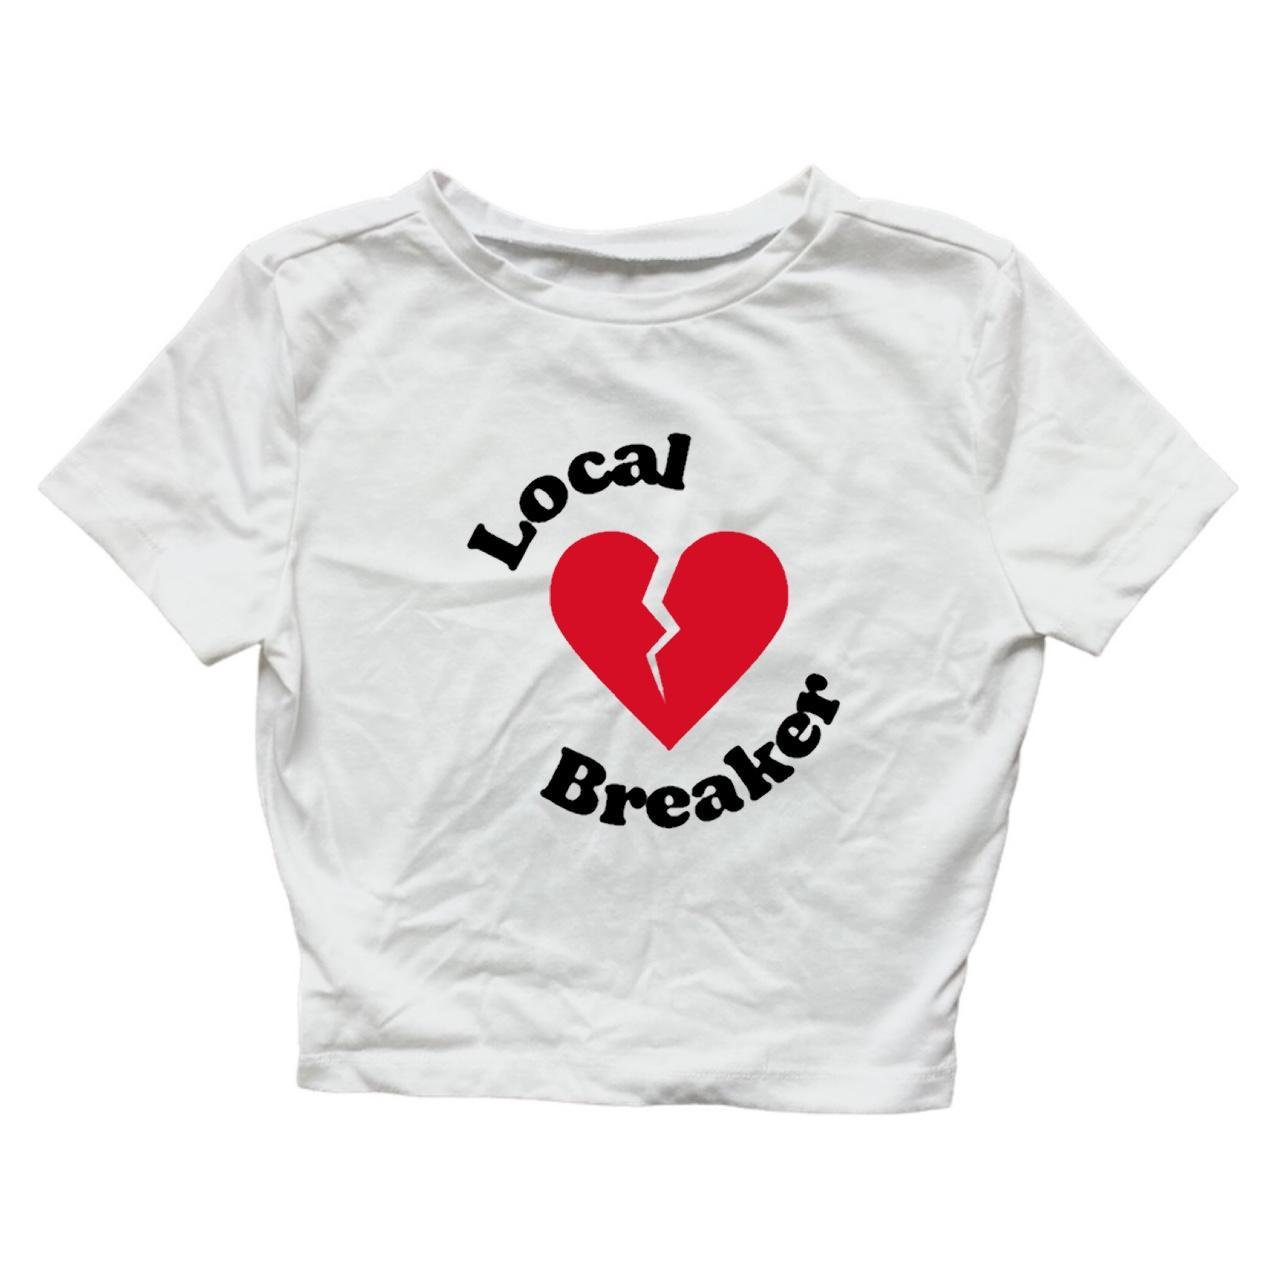 Product Image 2 - ☆ “Local 💔 breaker” white